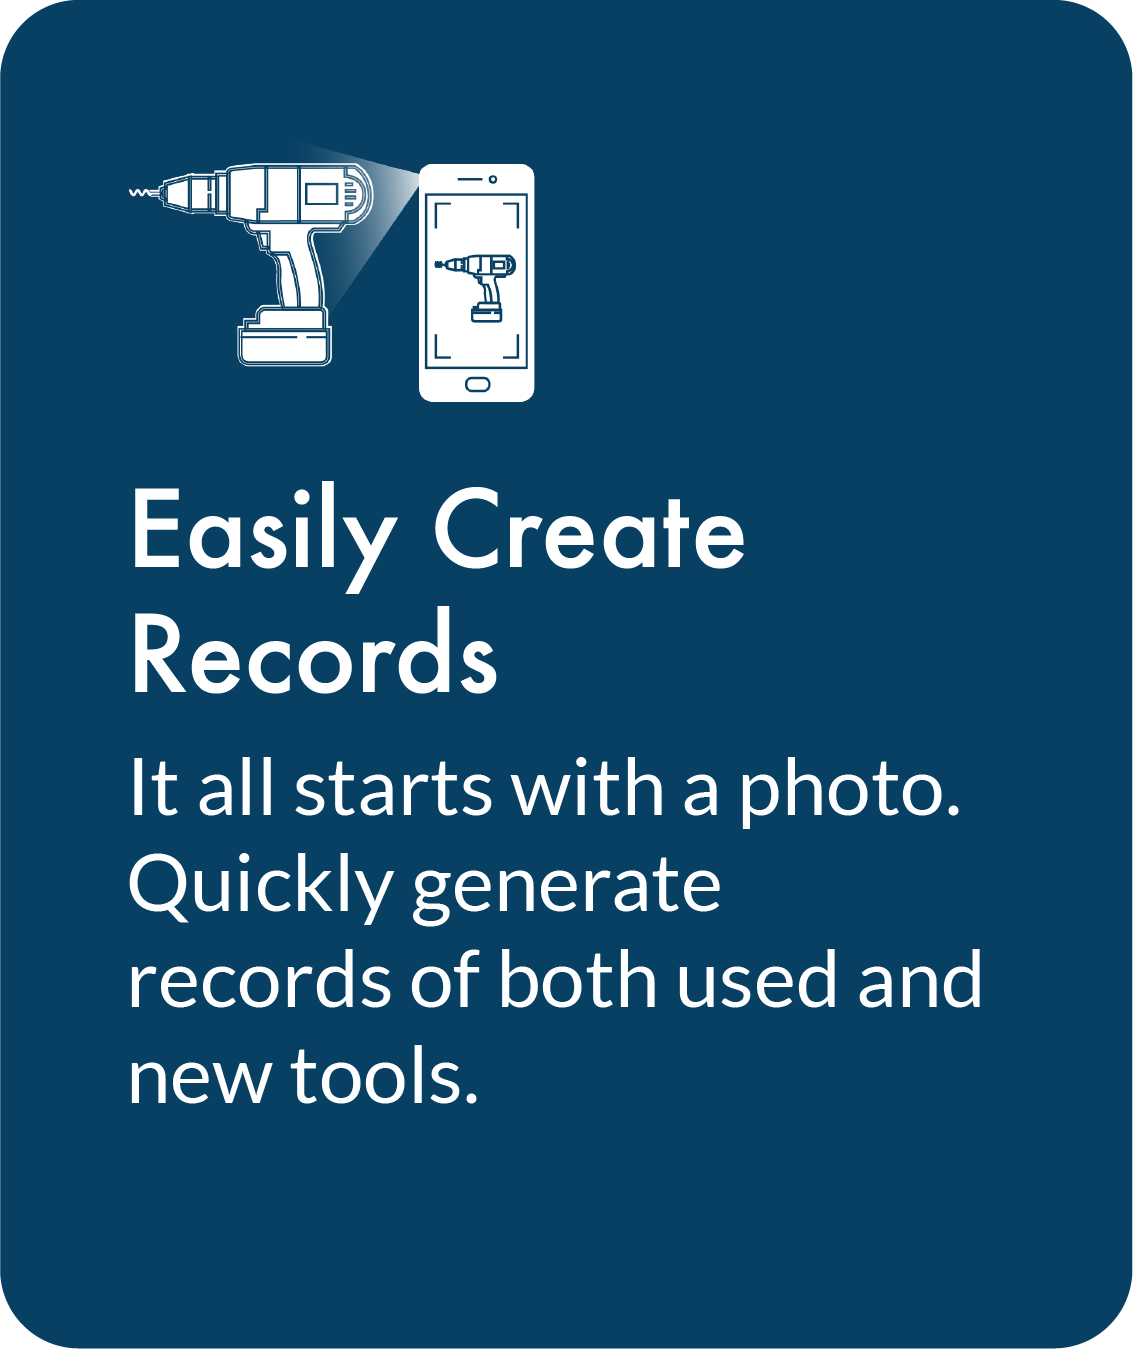 Easily Create Records. It all starts with a photo. Quickly generate records of both used and new tools.